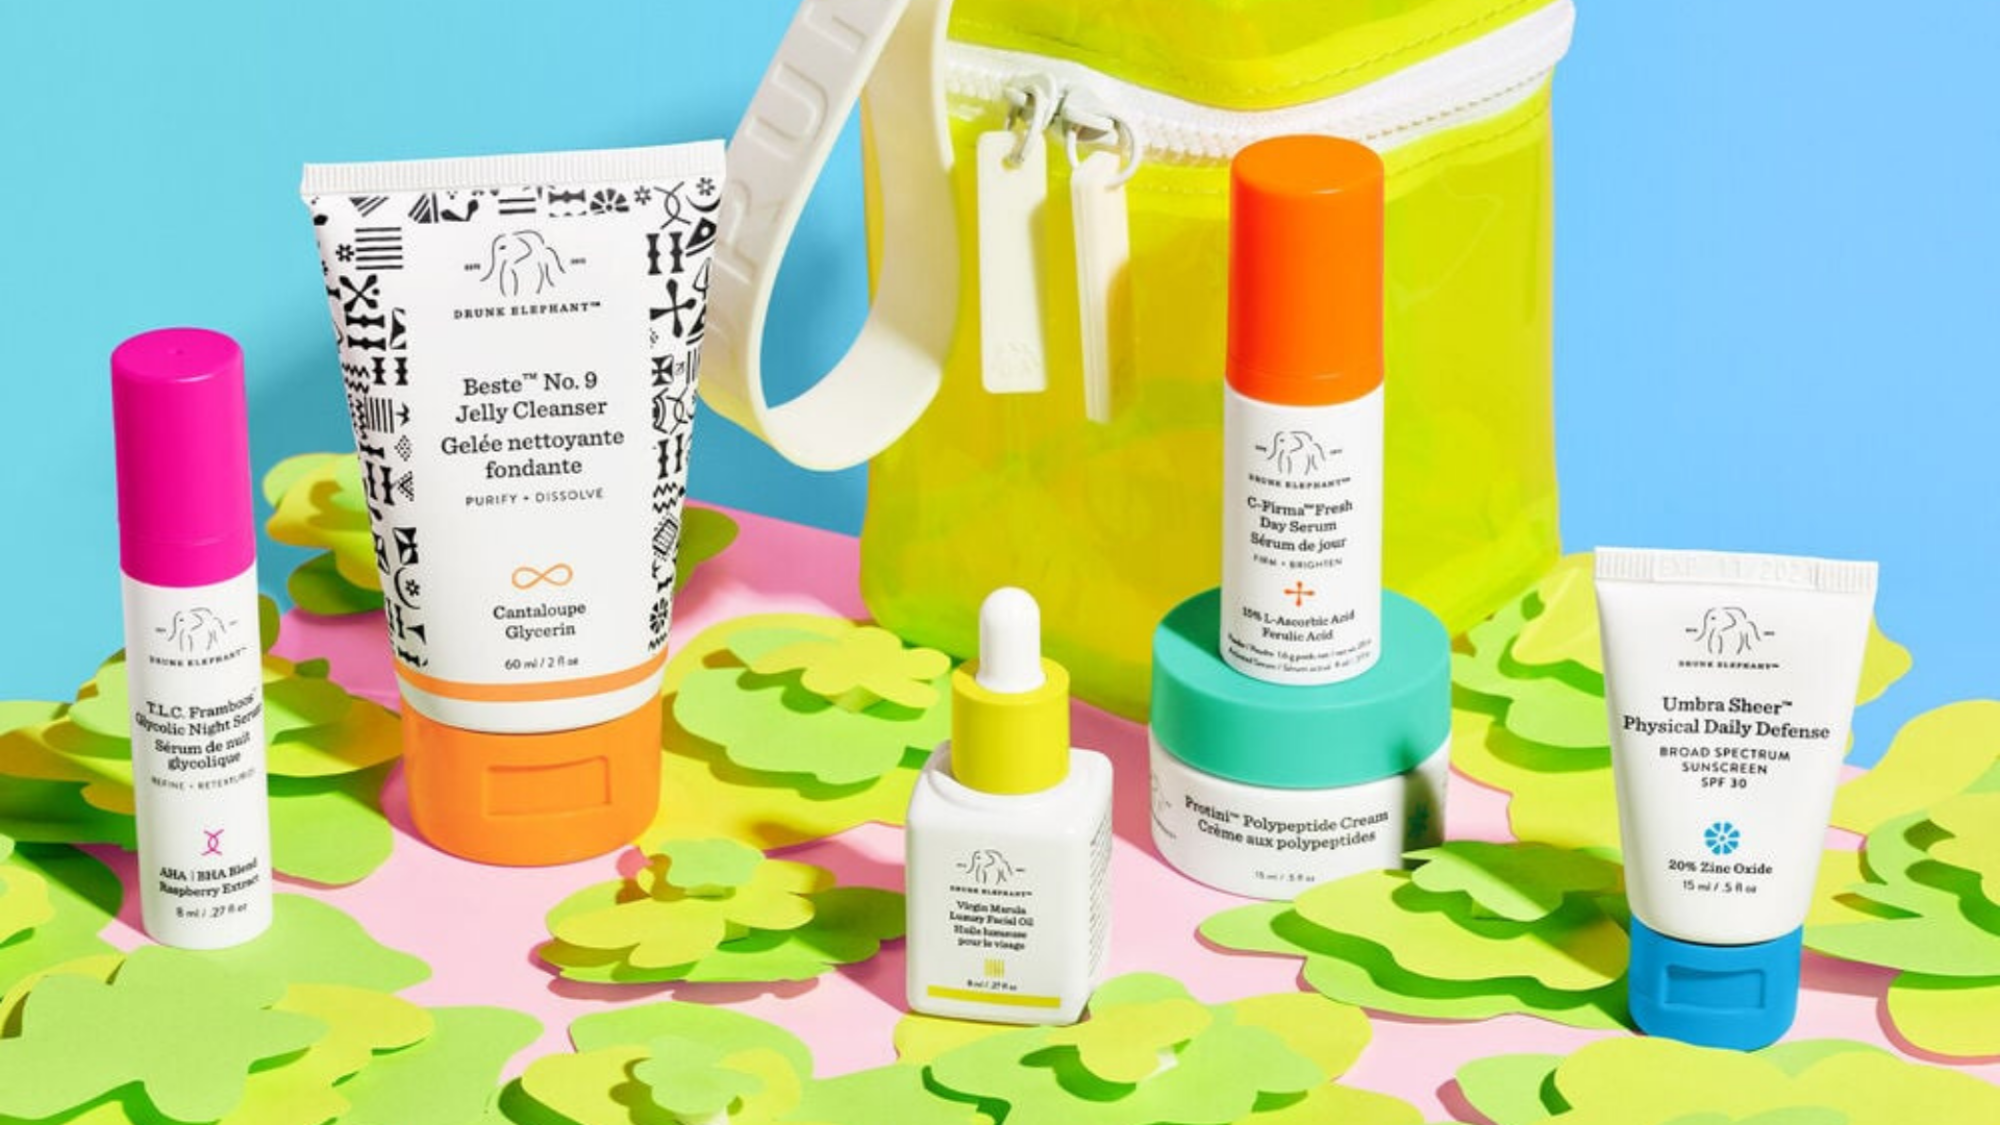 Five Drunk Elephant products with neon coloring: hot pink, orange, yellow, dark orange, and teal. 